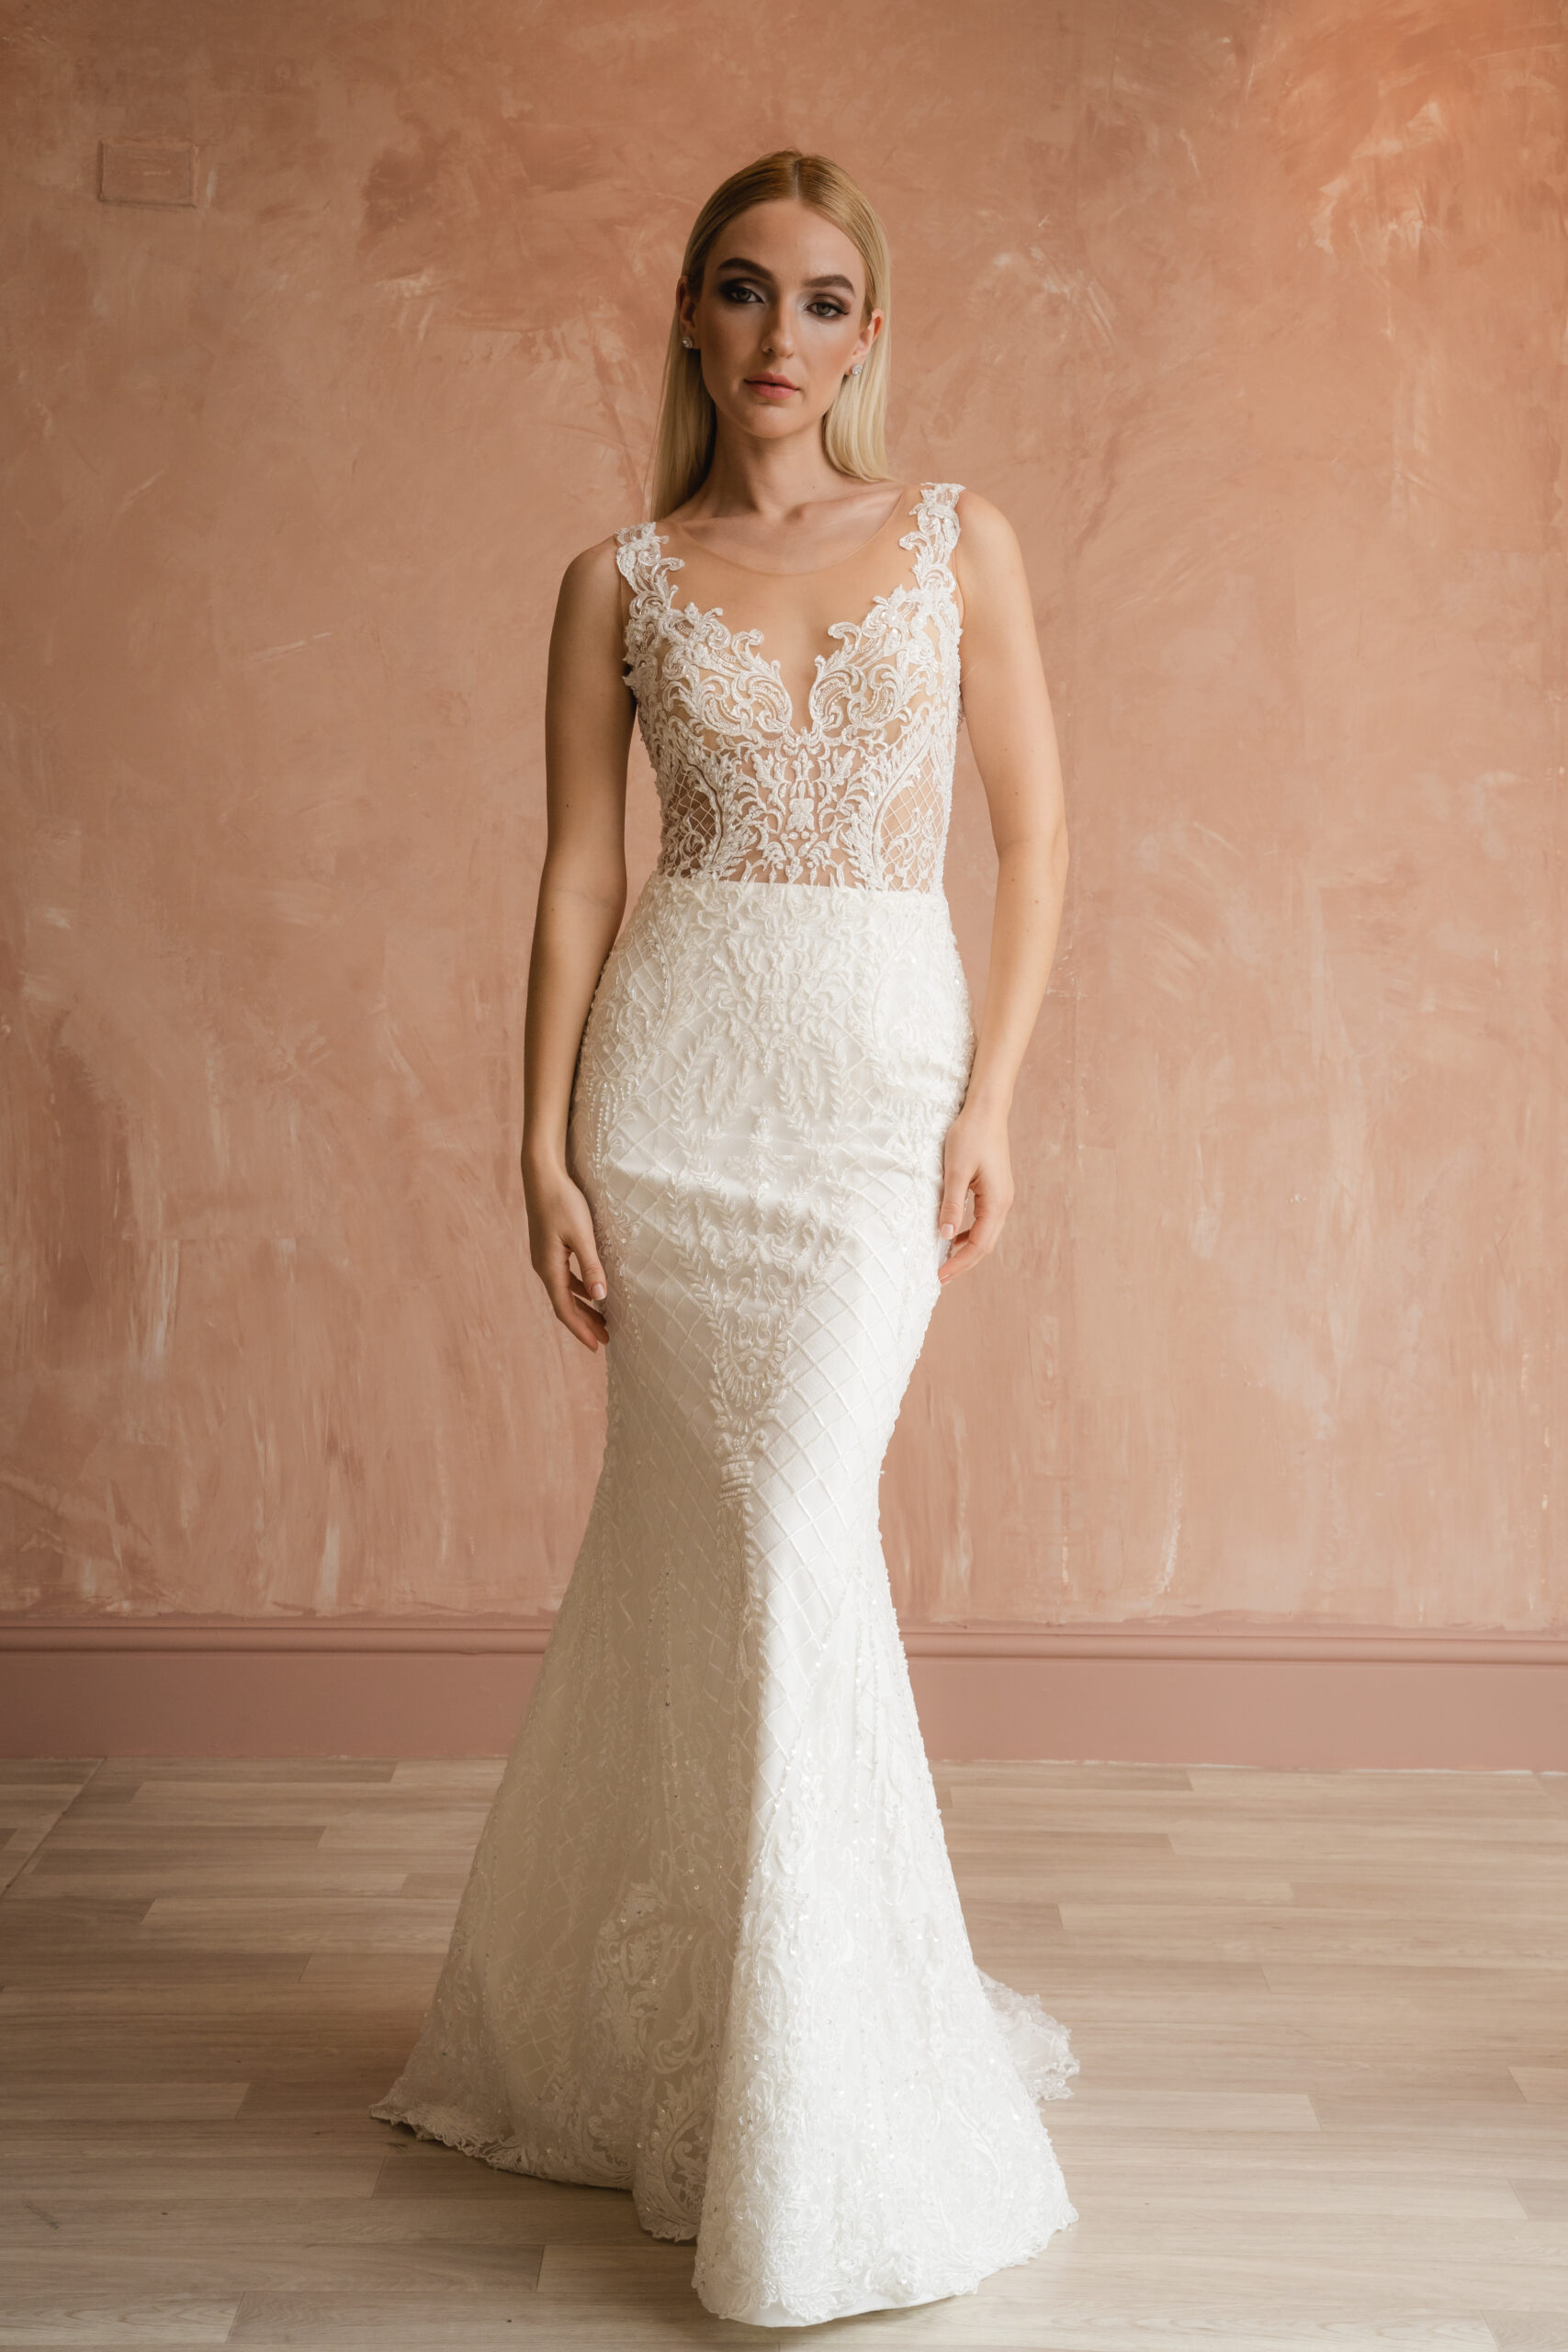 This Jana Ann Bridal Collection Has Got the Dress For You!